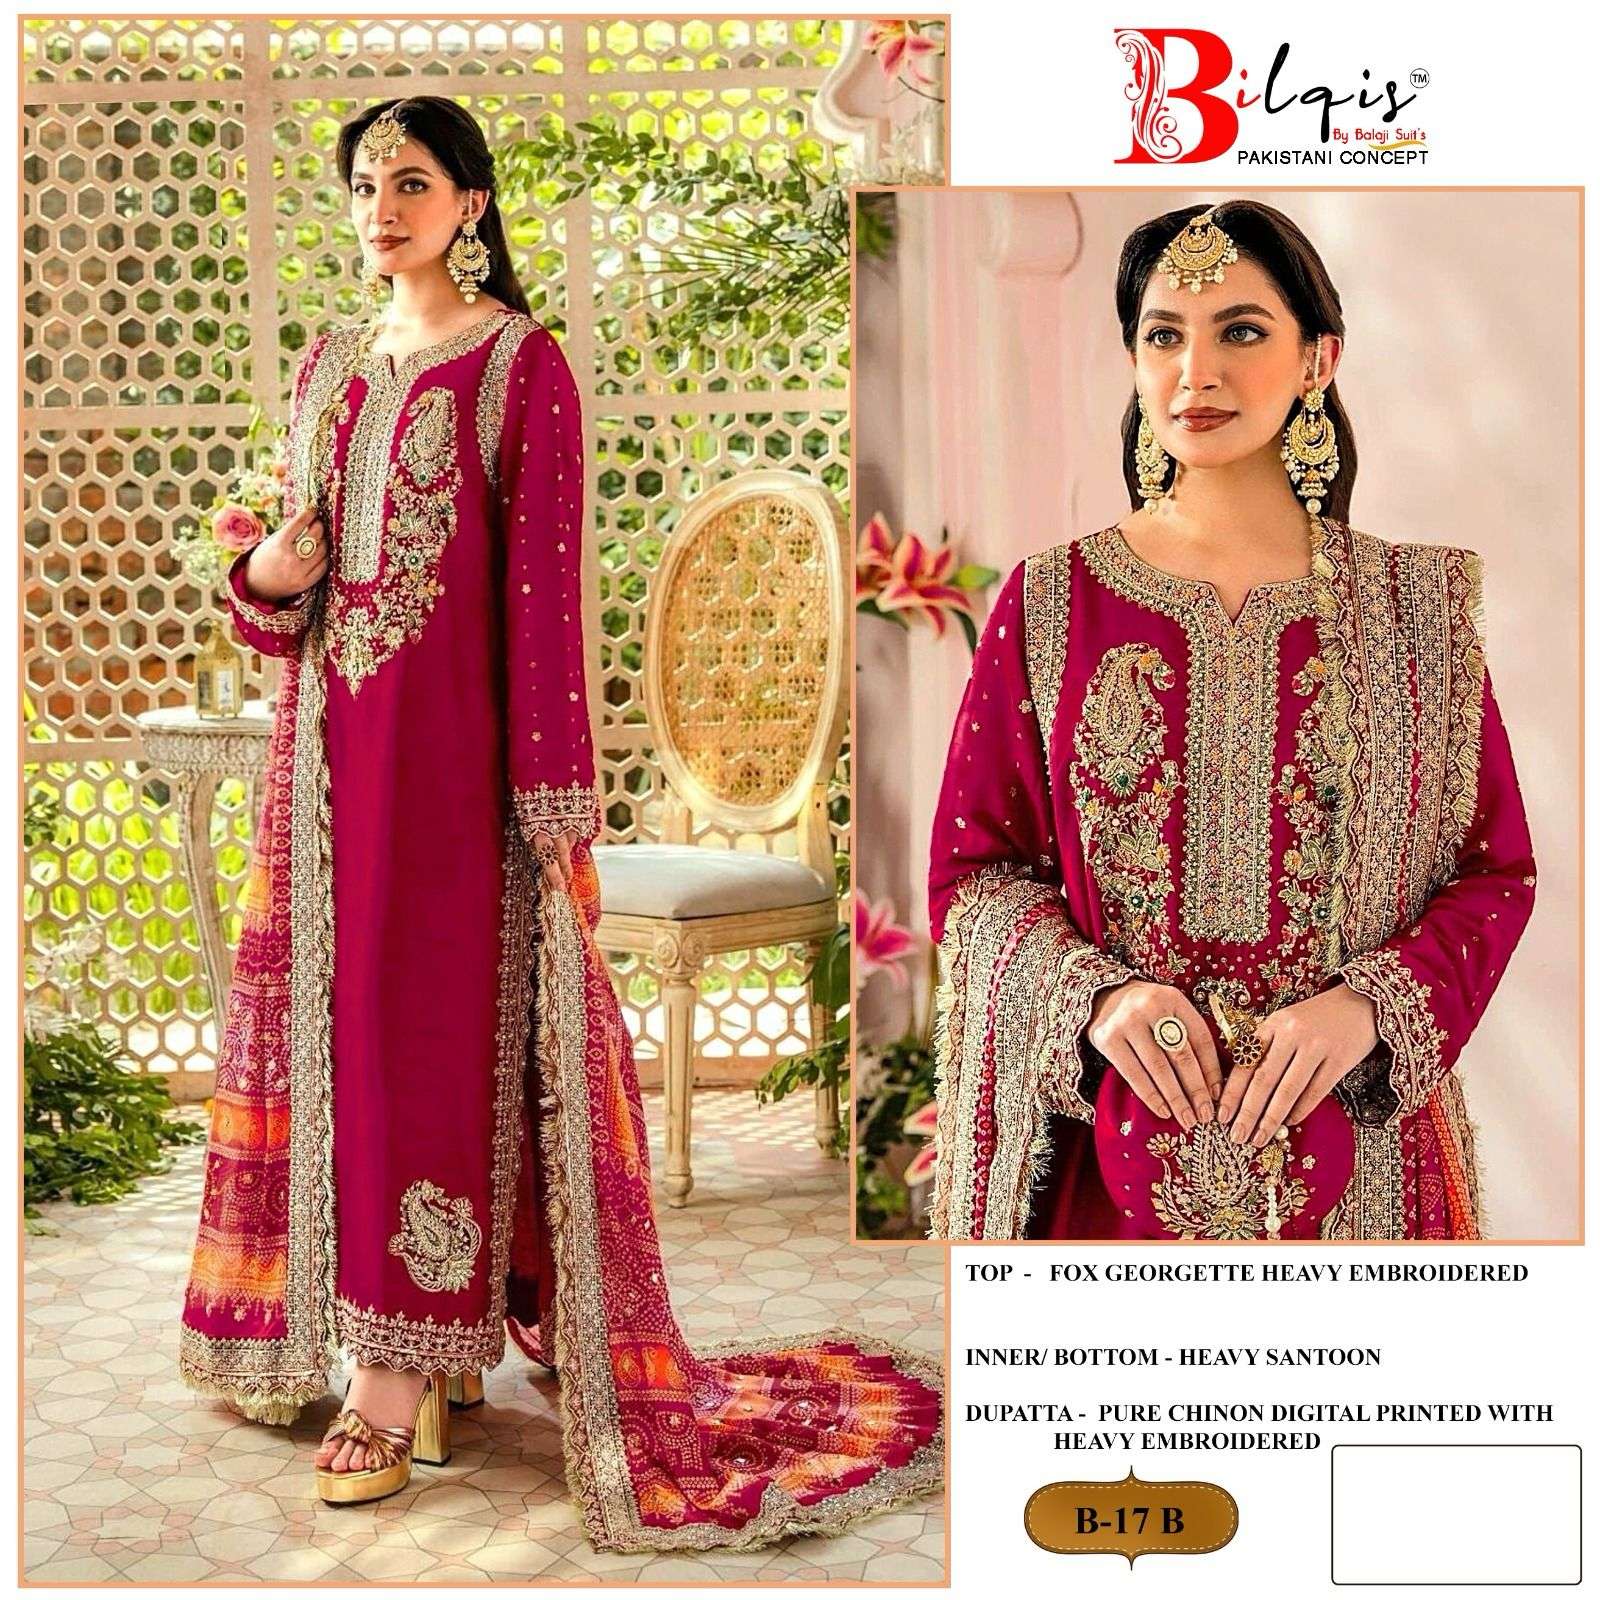 Bilqis B 17 A And B Faux Georgette Embroidered Pakistani Suits Wholesale catalog